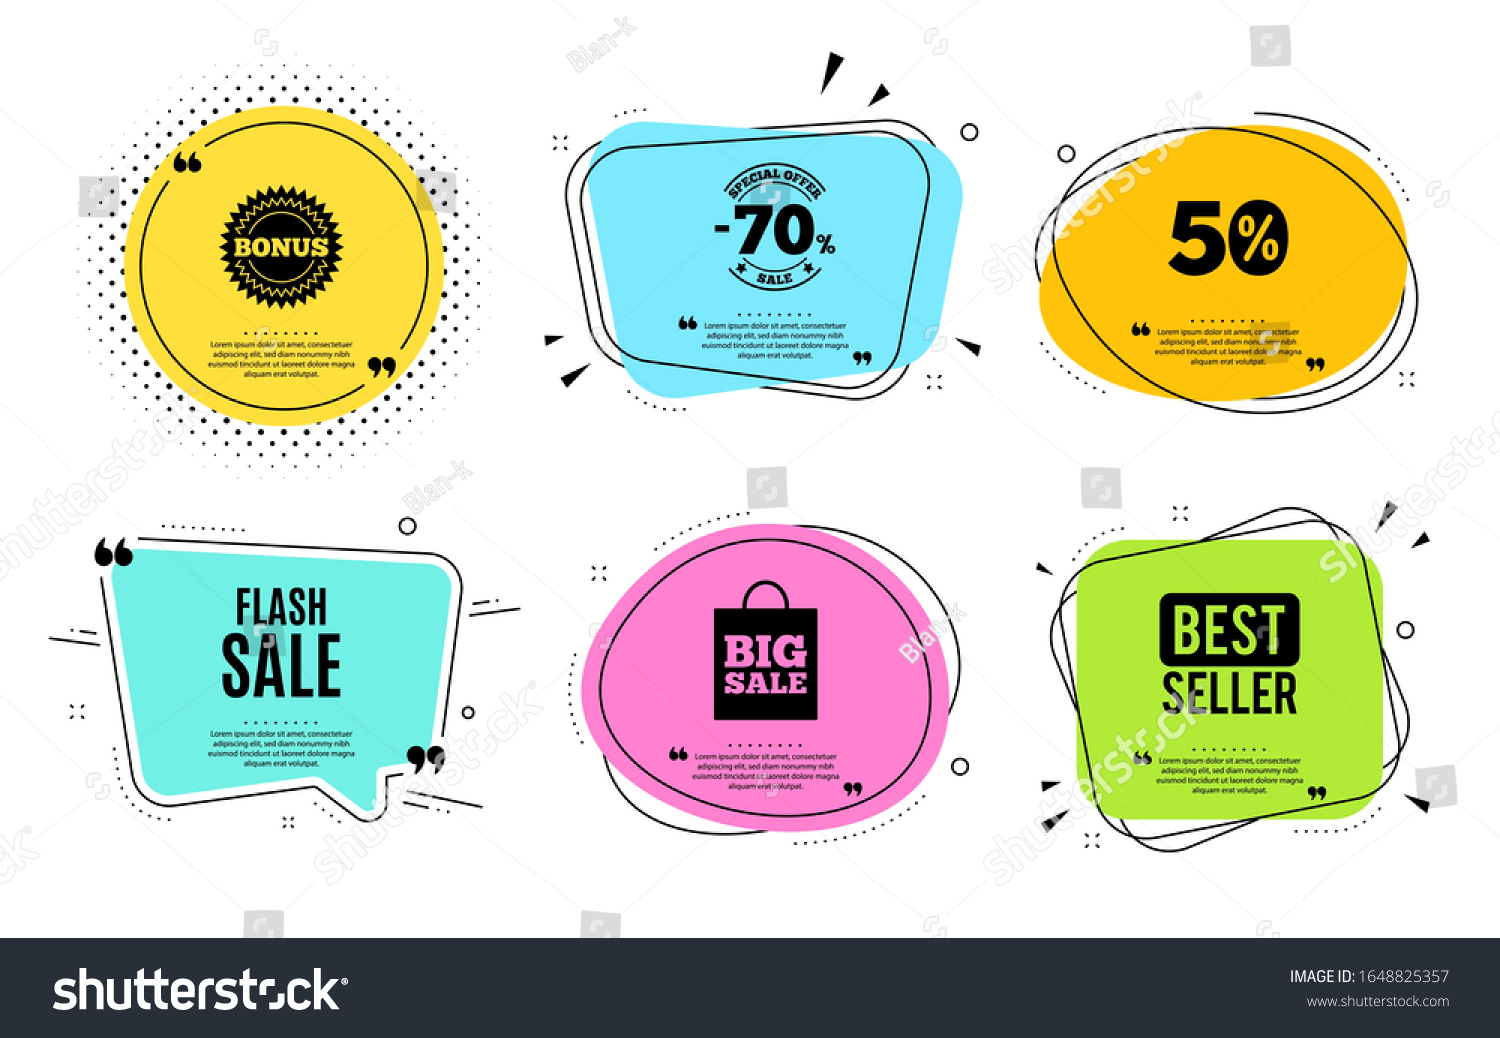 Flash Sale. Best seller, quote text. Special offer price sign. Advertising Discounts symbol. Quotation bubble. Banner badge, texting quote boxes. Flash sale text. Coupon offer. #1648825357